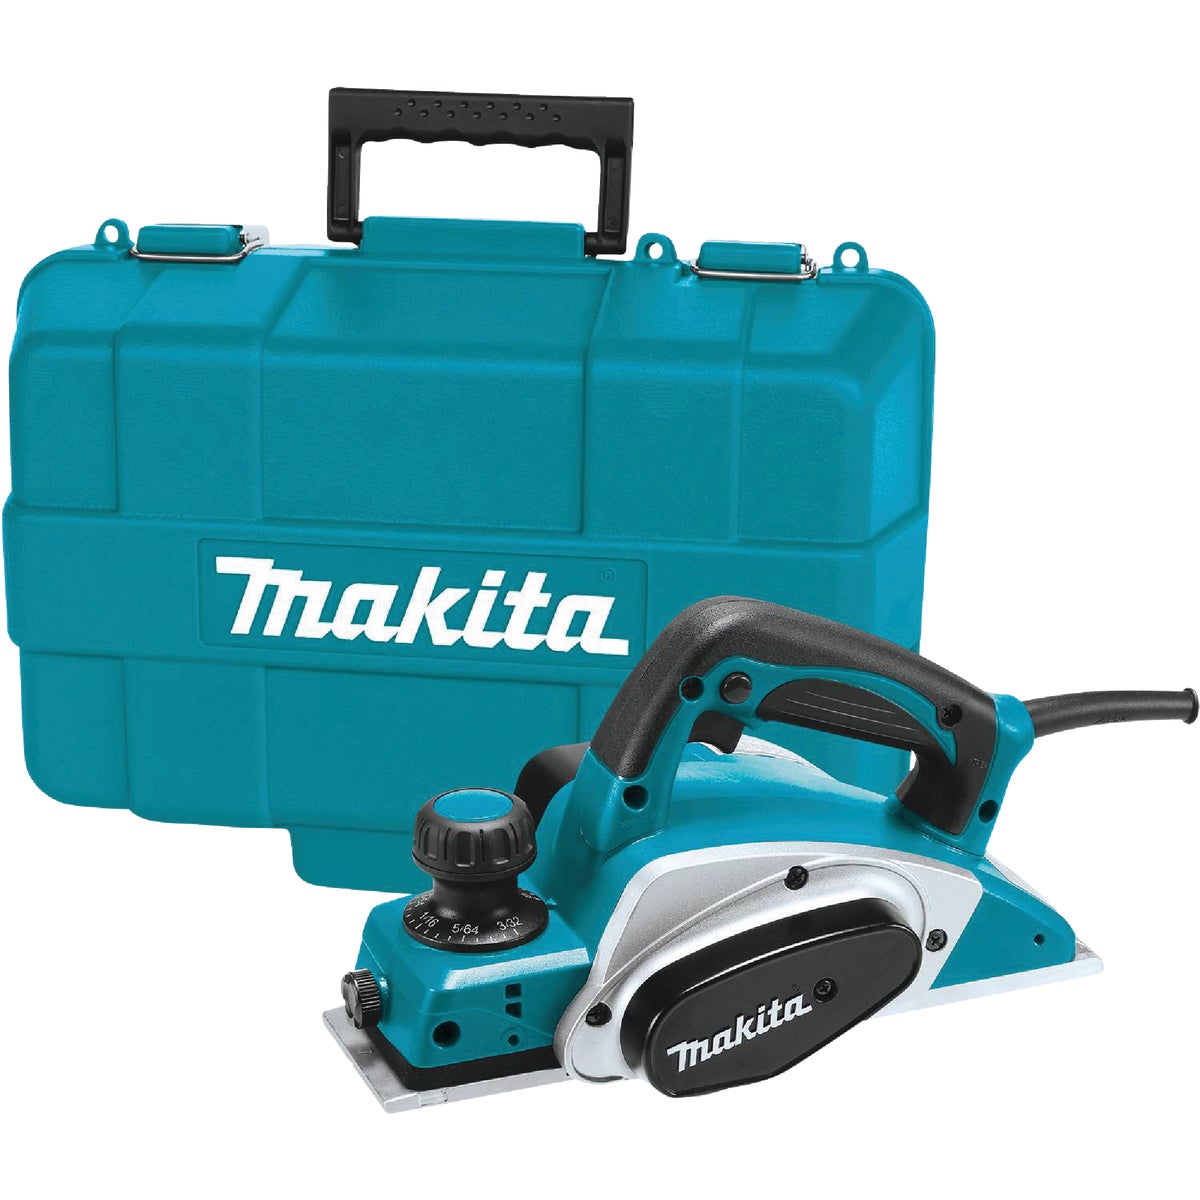 Makita 6.5A 3-1/4 In. 3/32 In. Planing Depth Planer